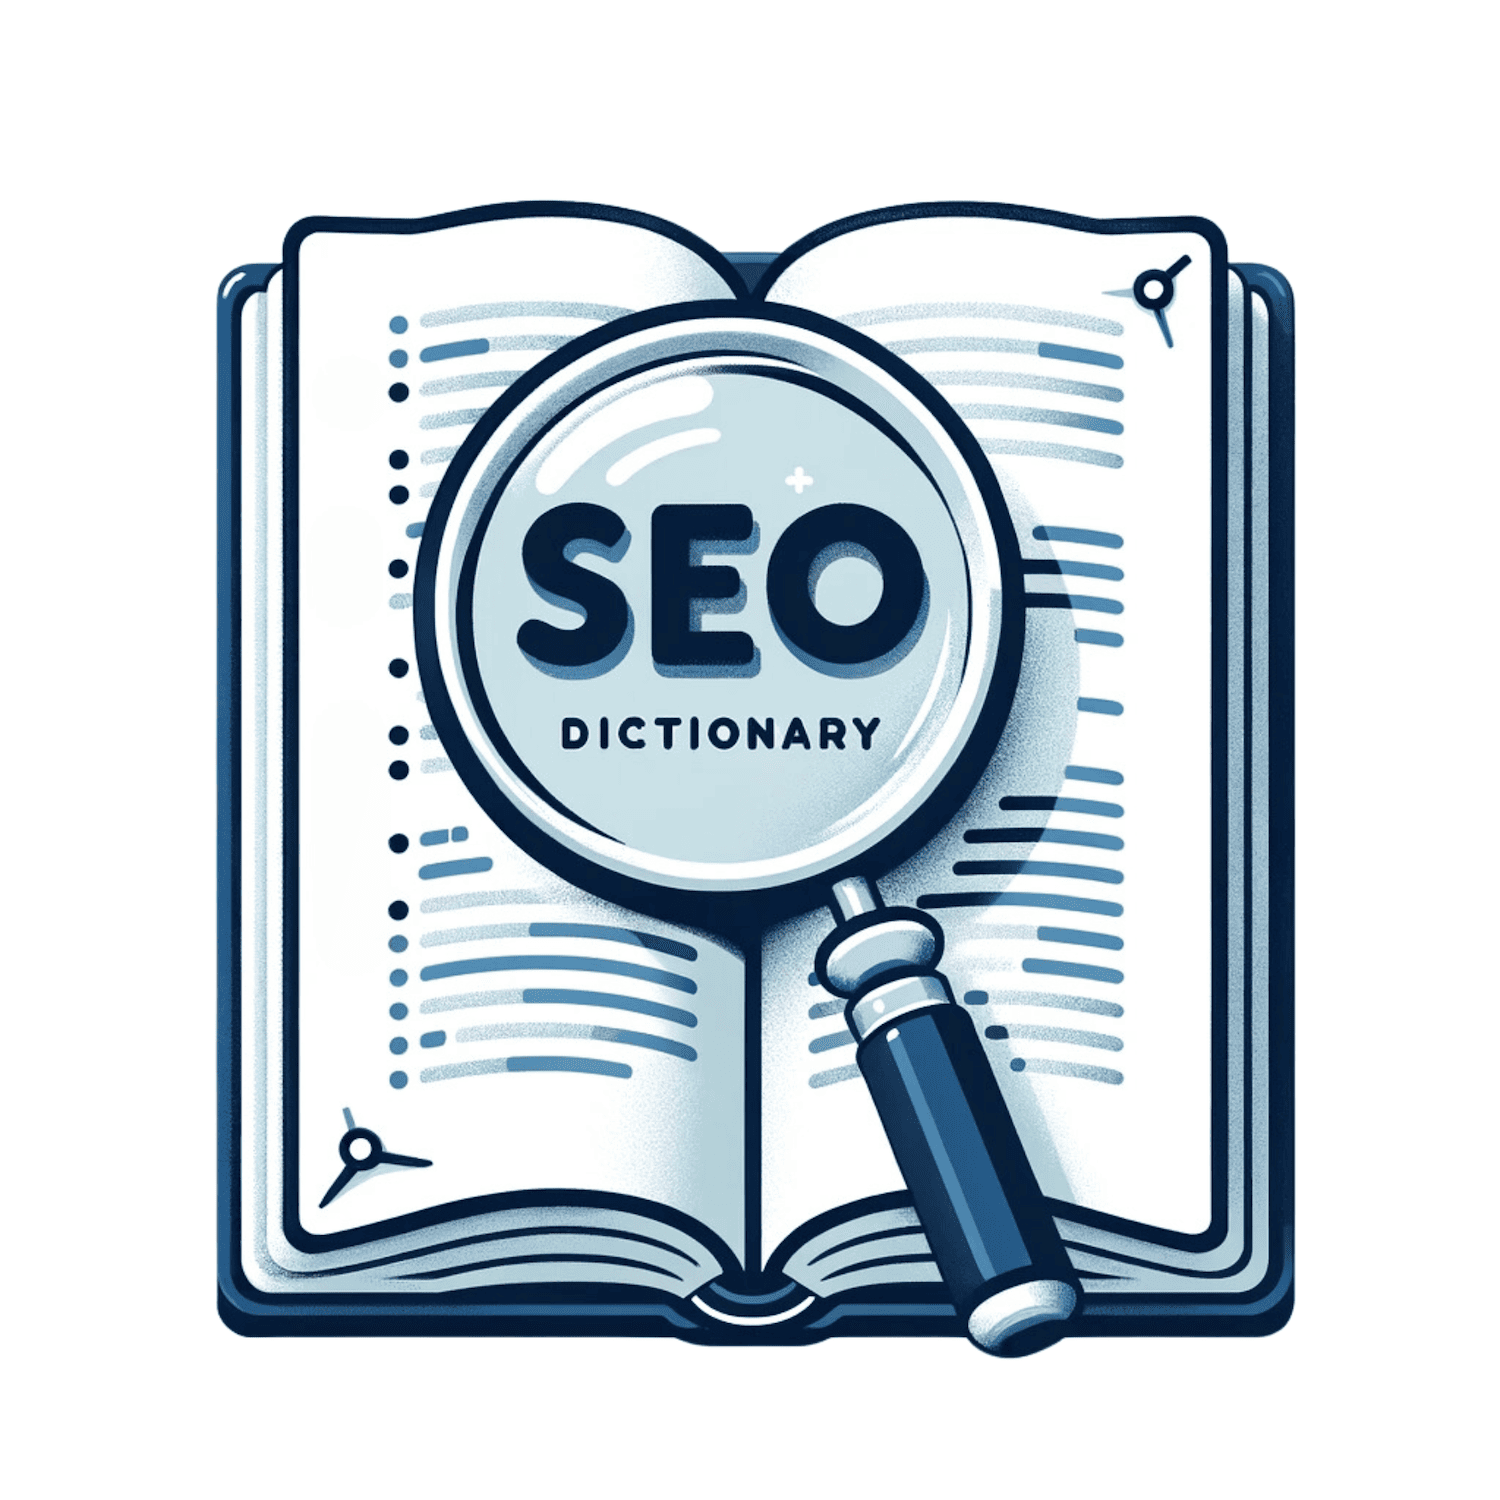 Seo dictionary essential terms you need to know